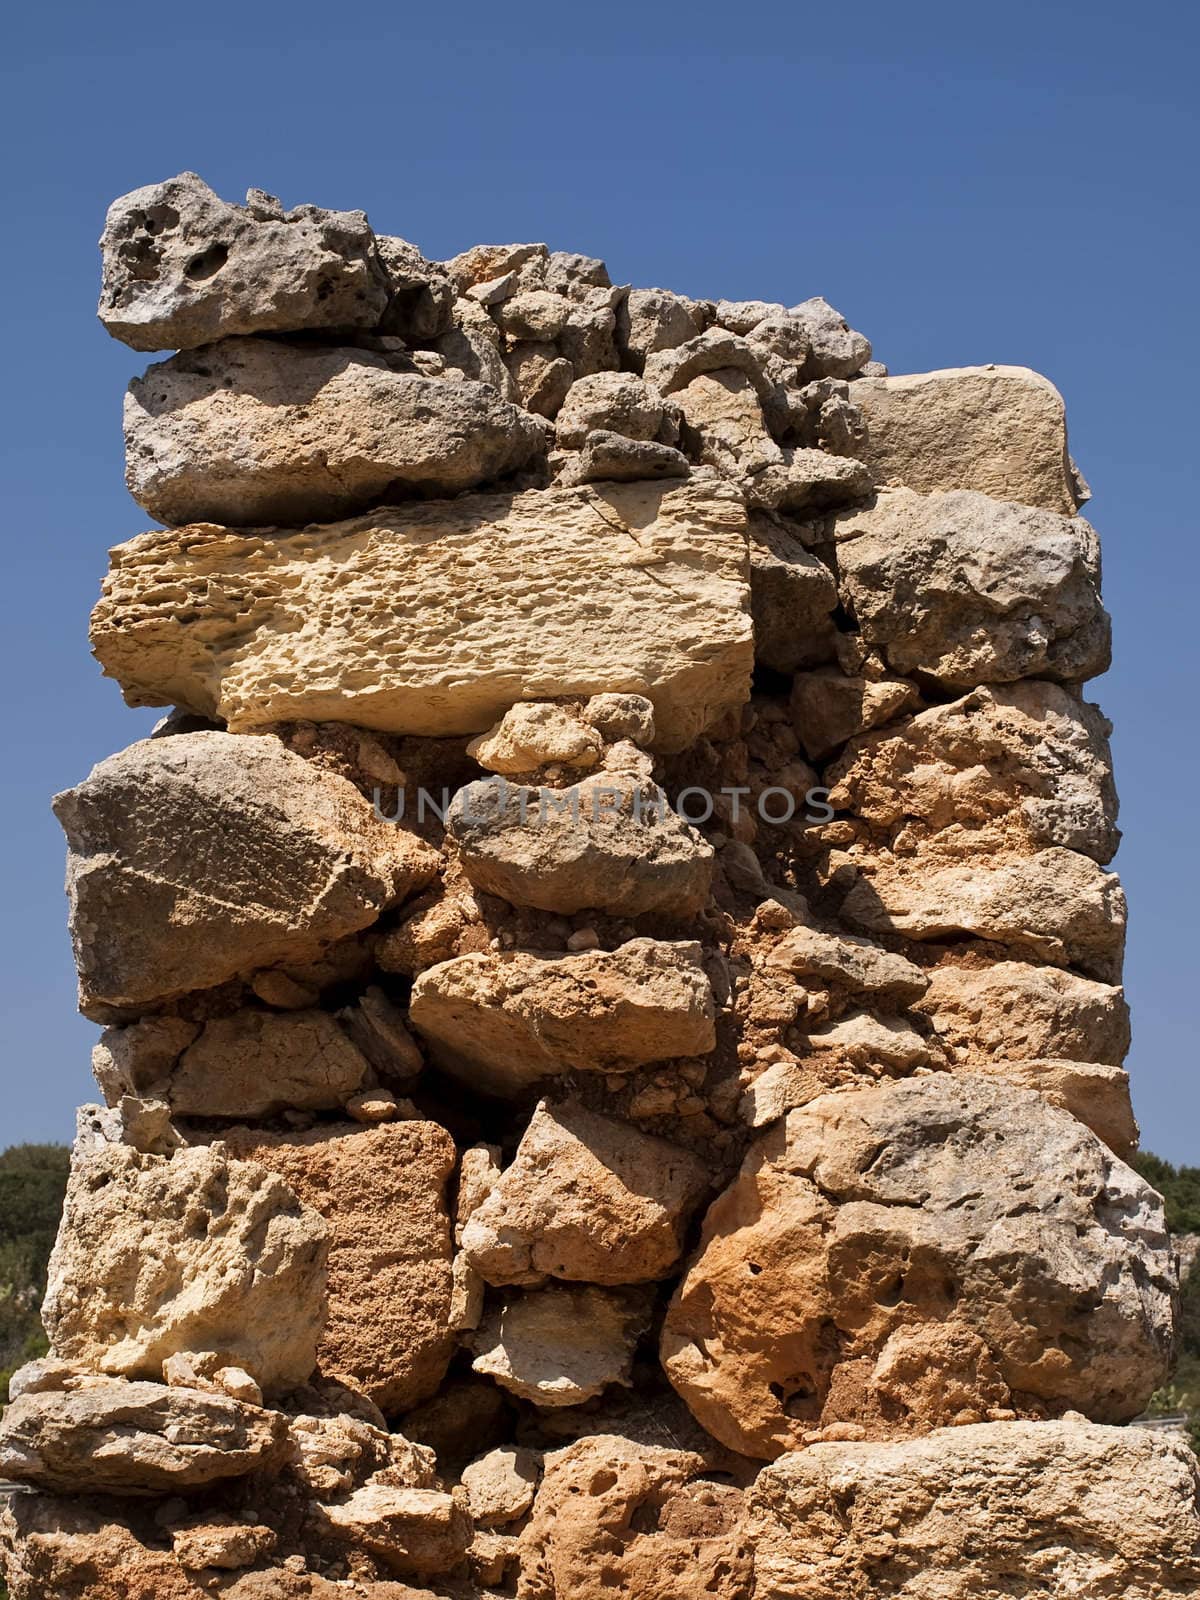 Cross section of old and neglected historic Roman wall on the island of Malta